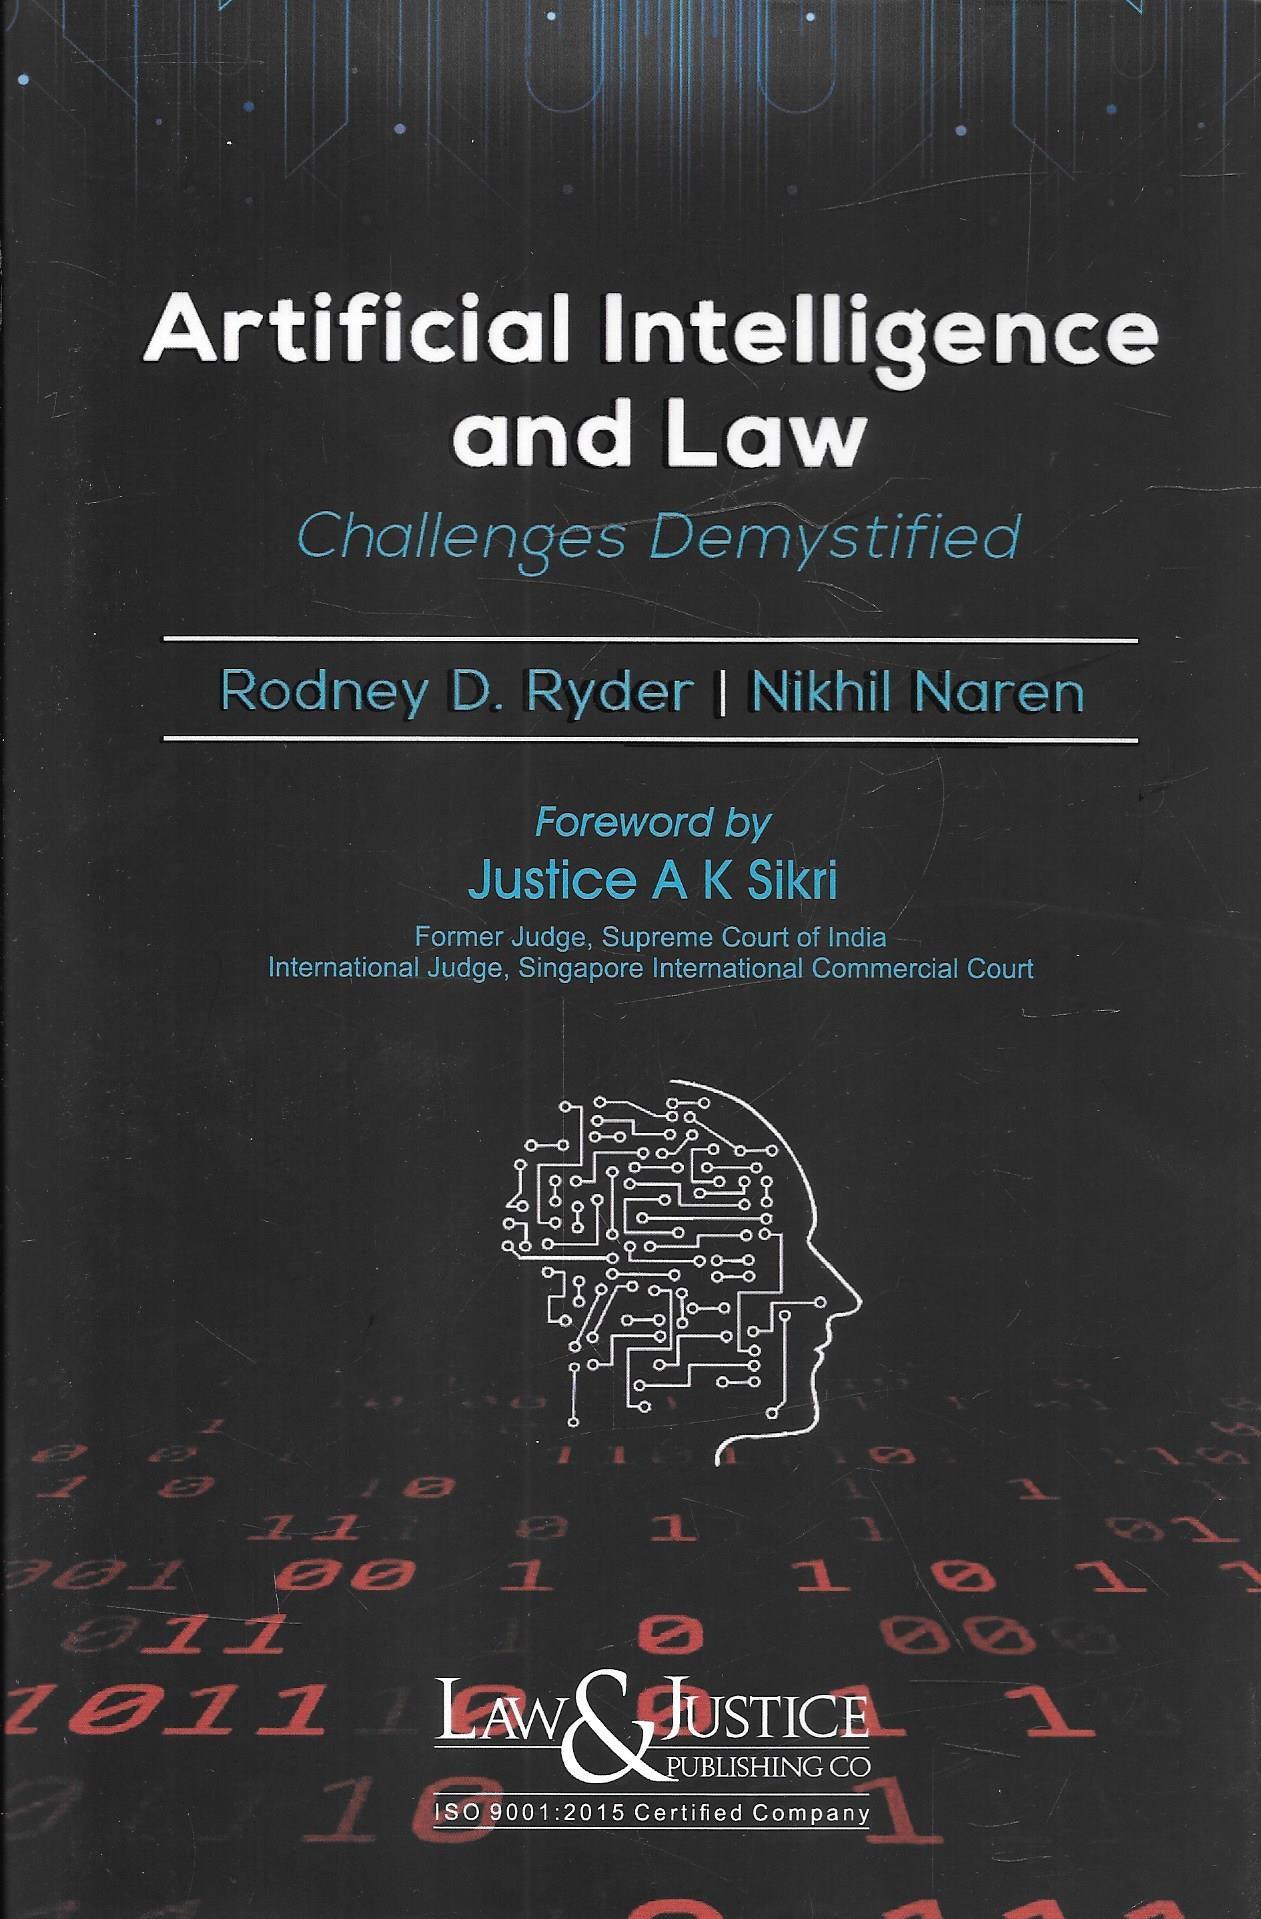 Artificial Intelligence and Law: Challenges Demystified